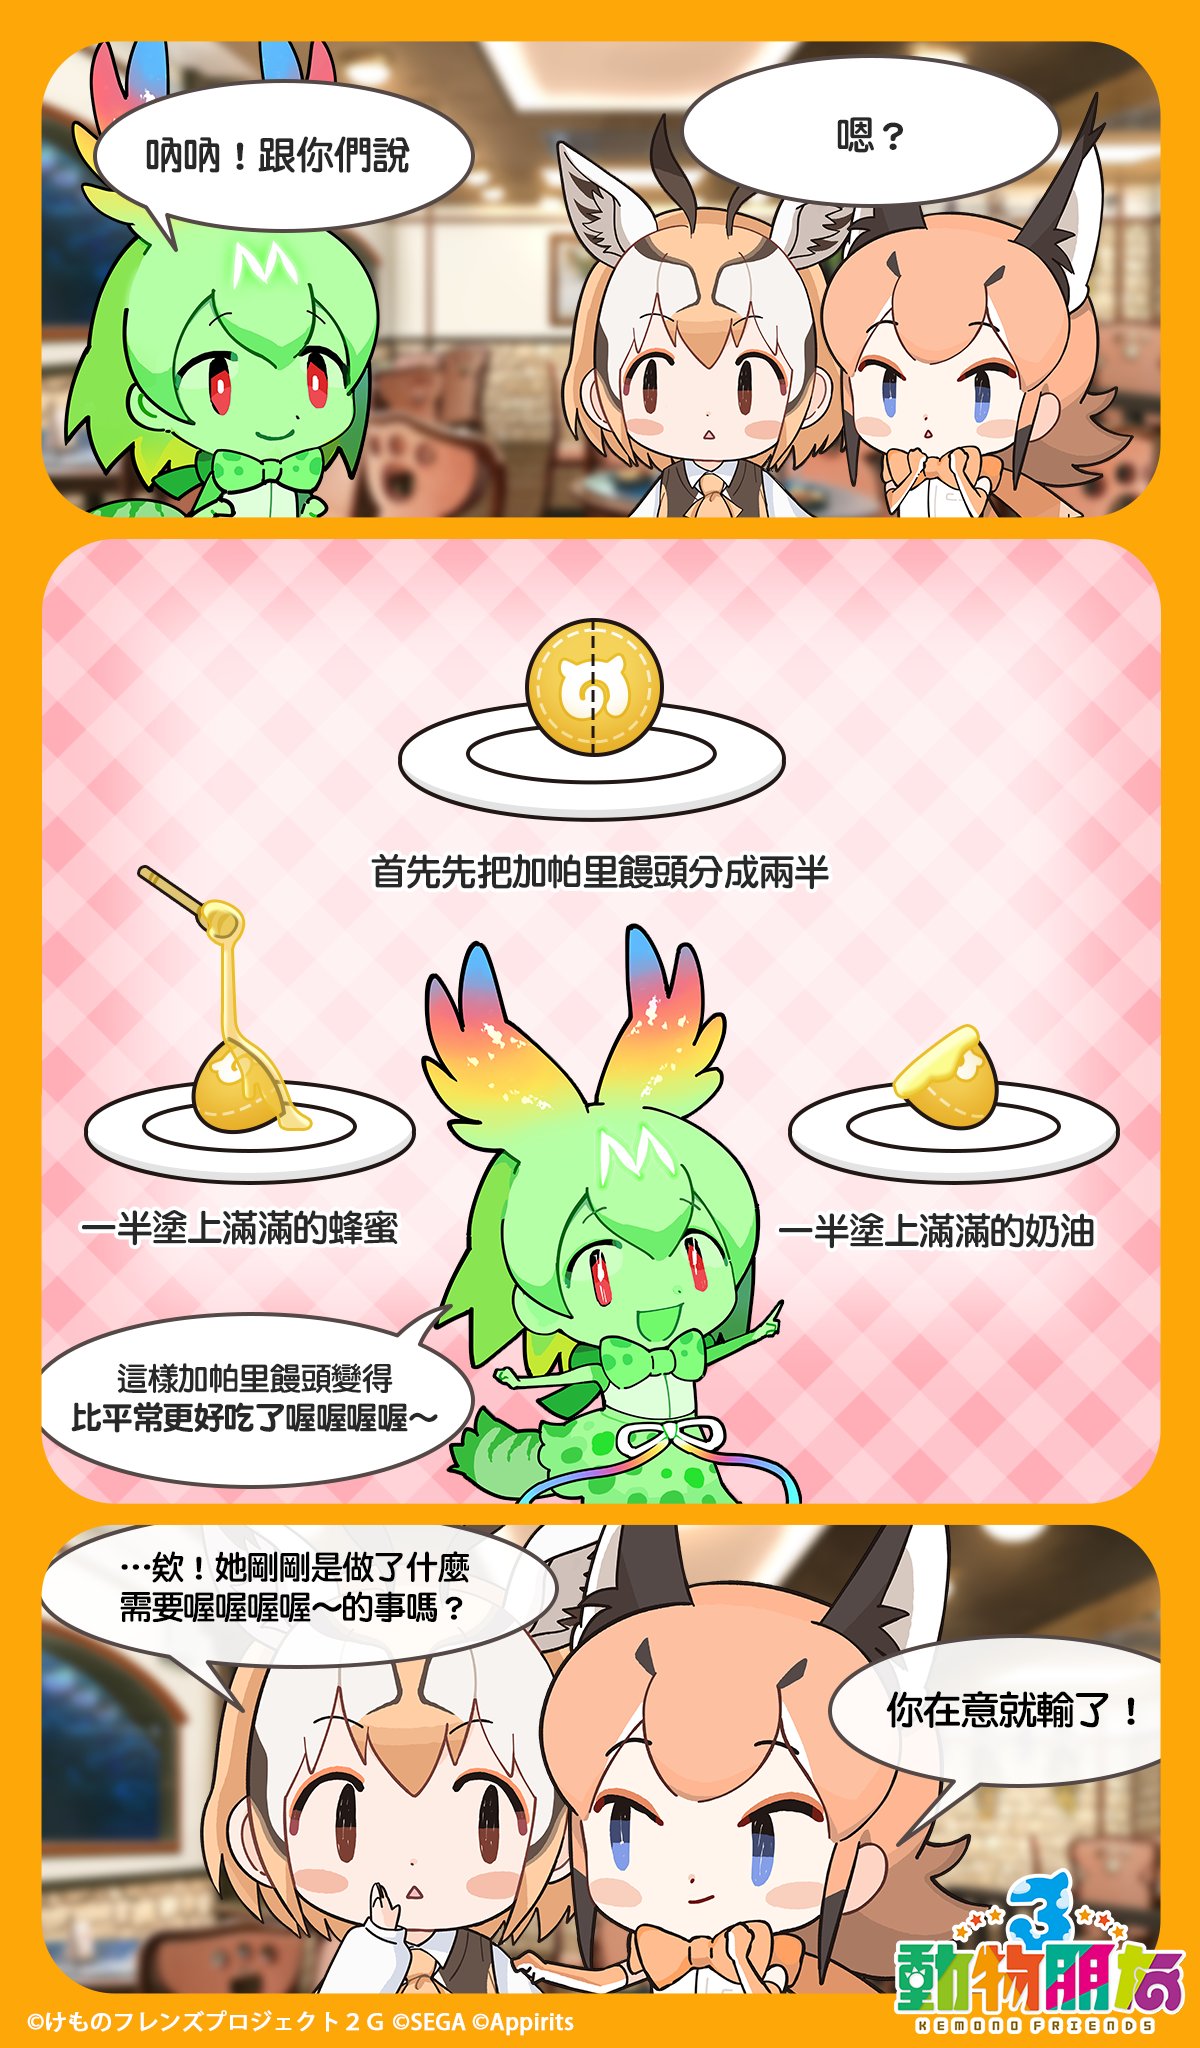 Official Cellval, Caracal, and Thomson's Gazelle Chibi art posted by KF3 Taiwan Twitter account.